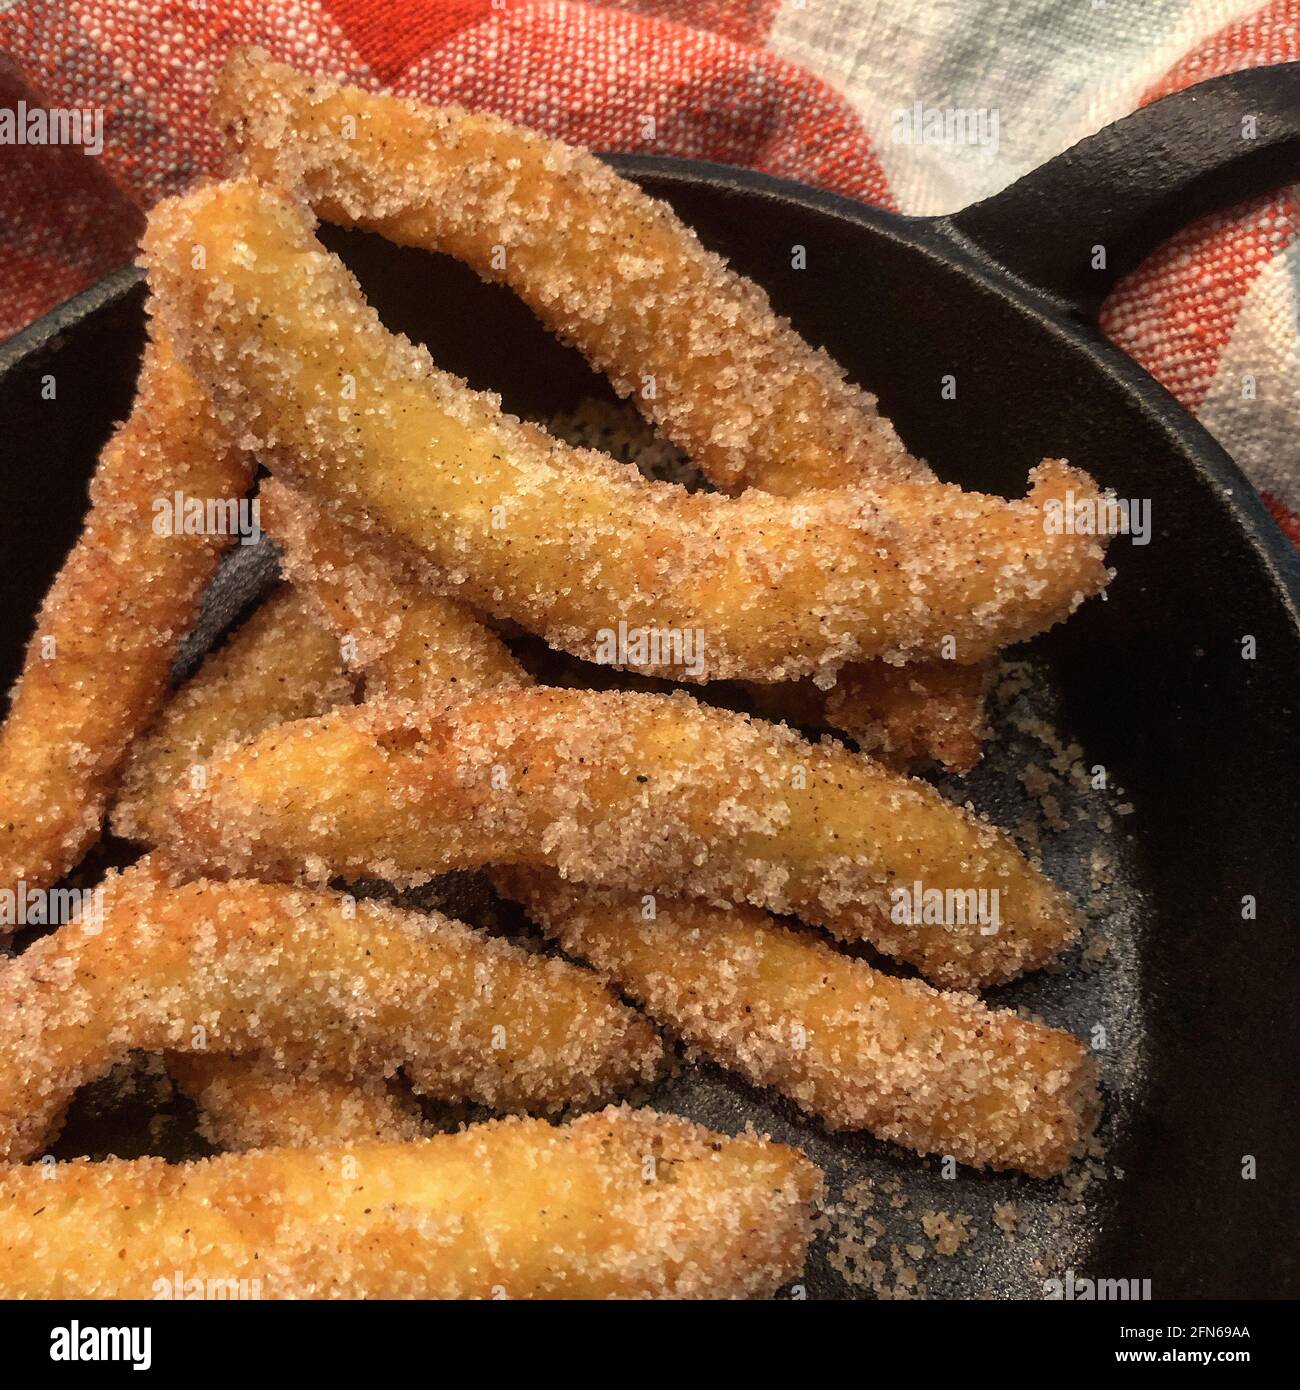 Fried Churros sprinkled with Sugar Stock Photo